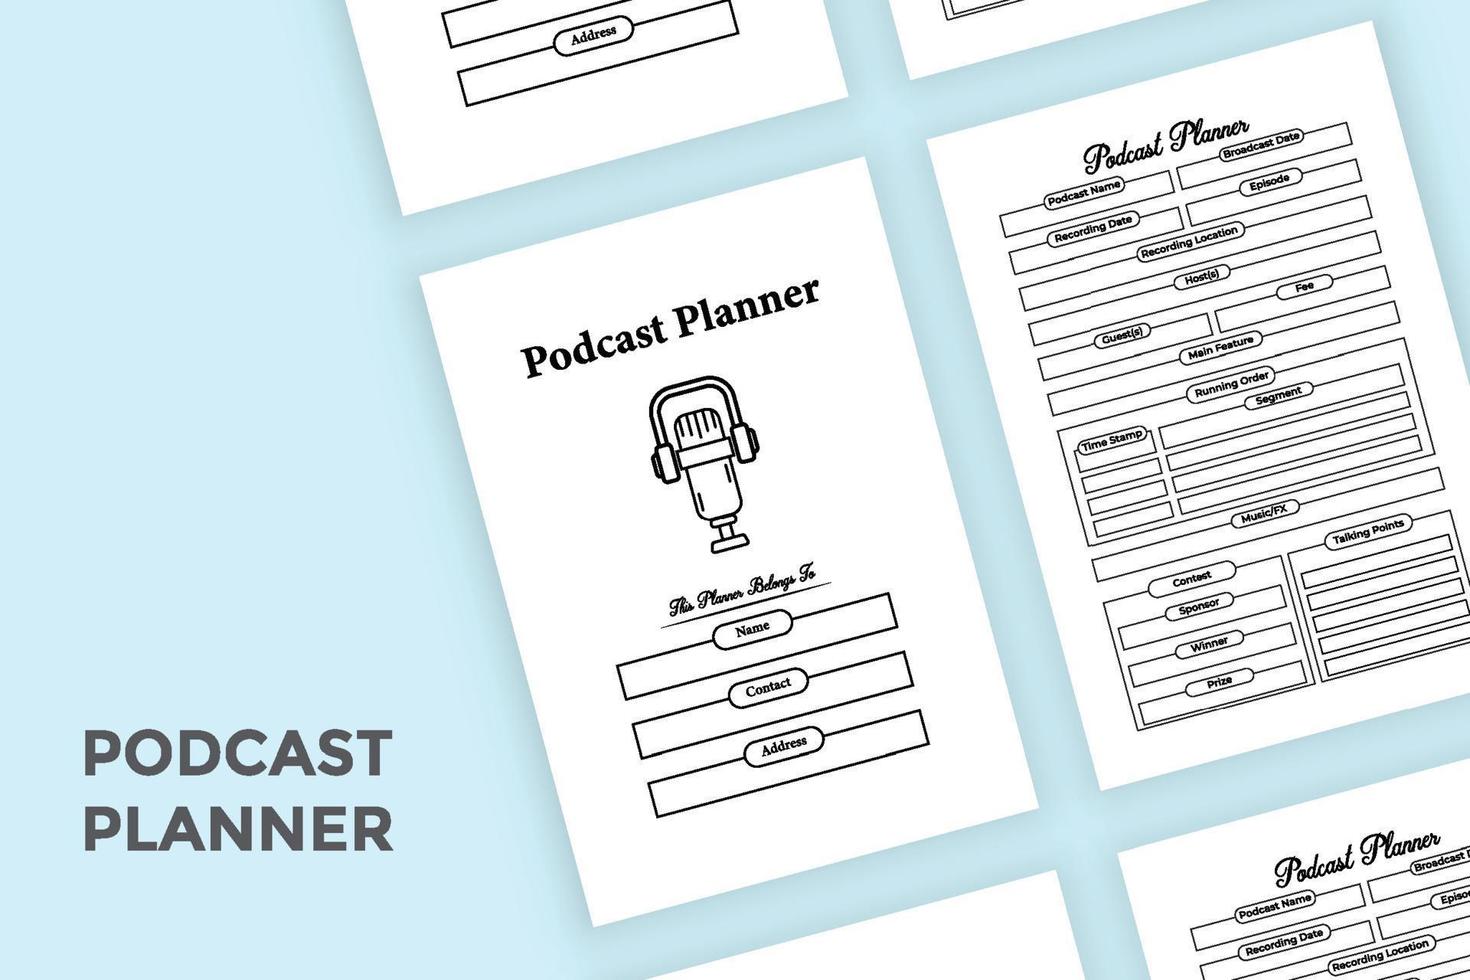 Podcast planner logbook interior. Radio station information notebook and guest tracker template. Interior of a logbook. Podcast planner and daily activity tracker interior. vector